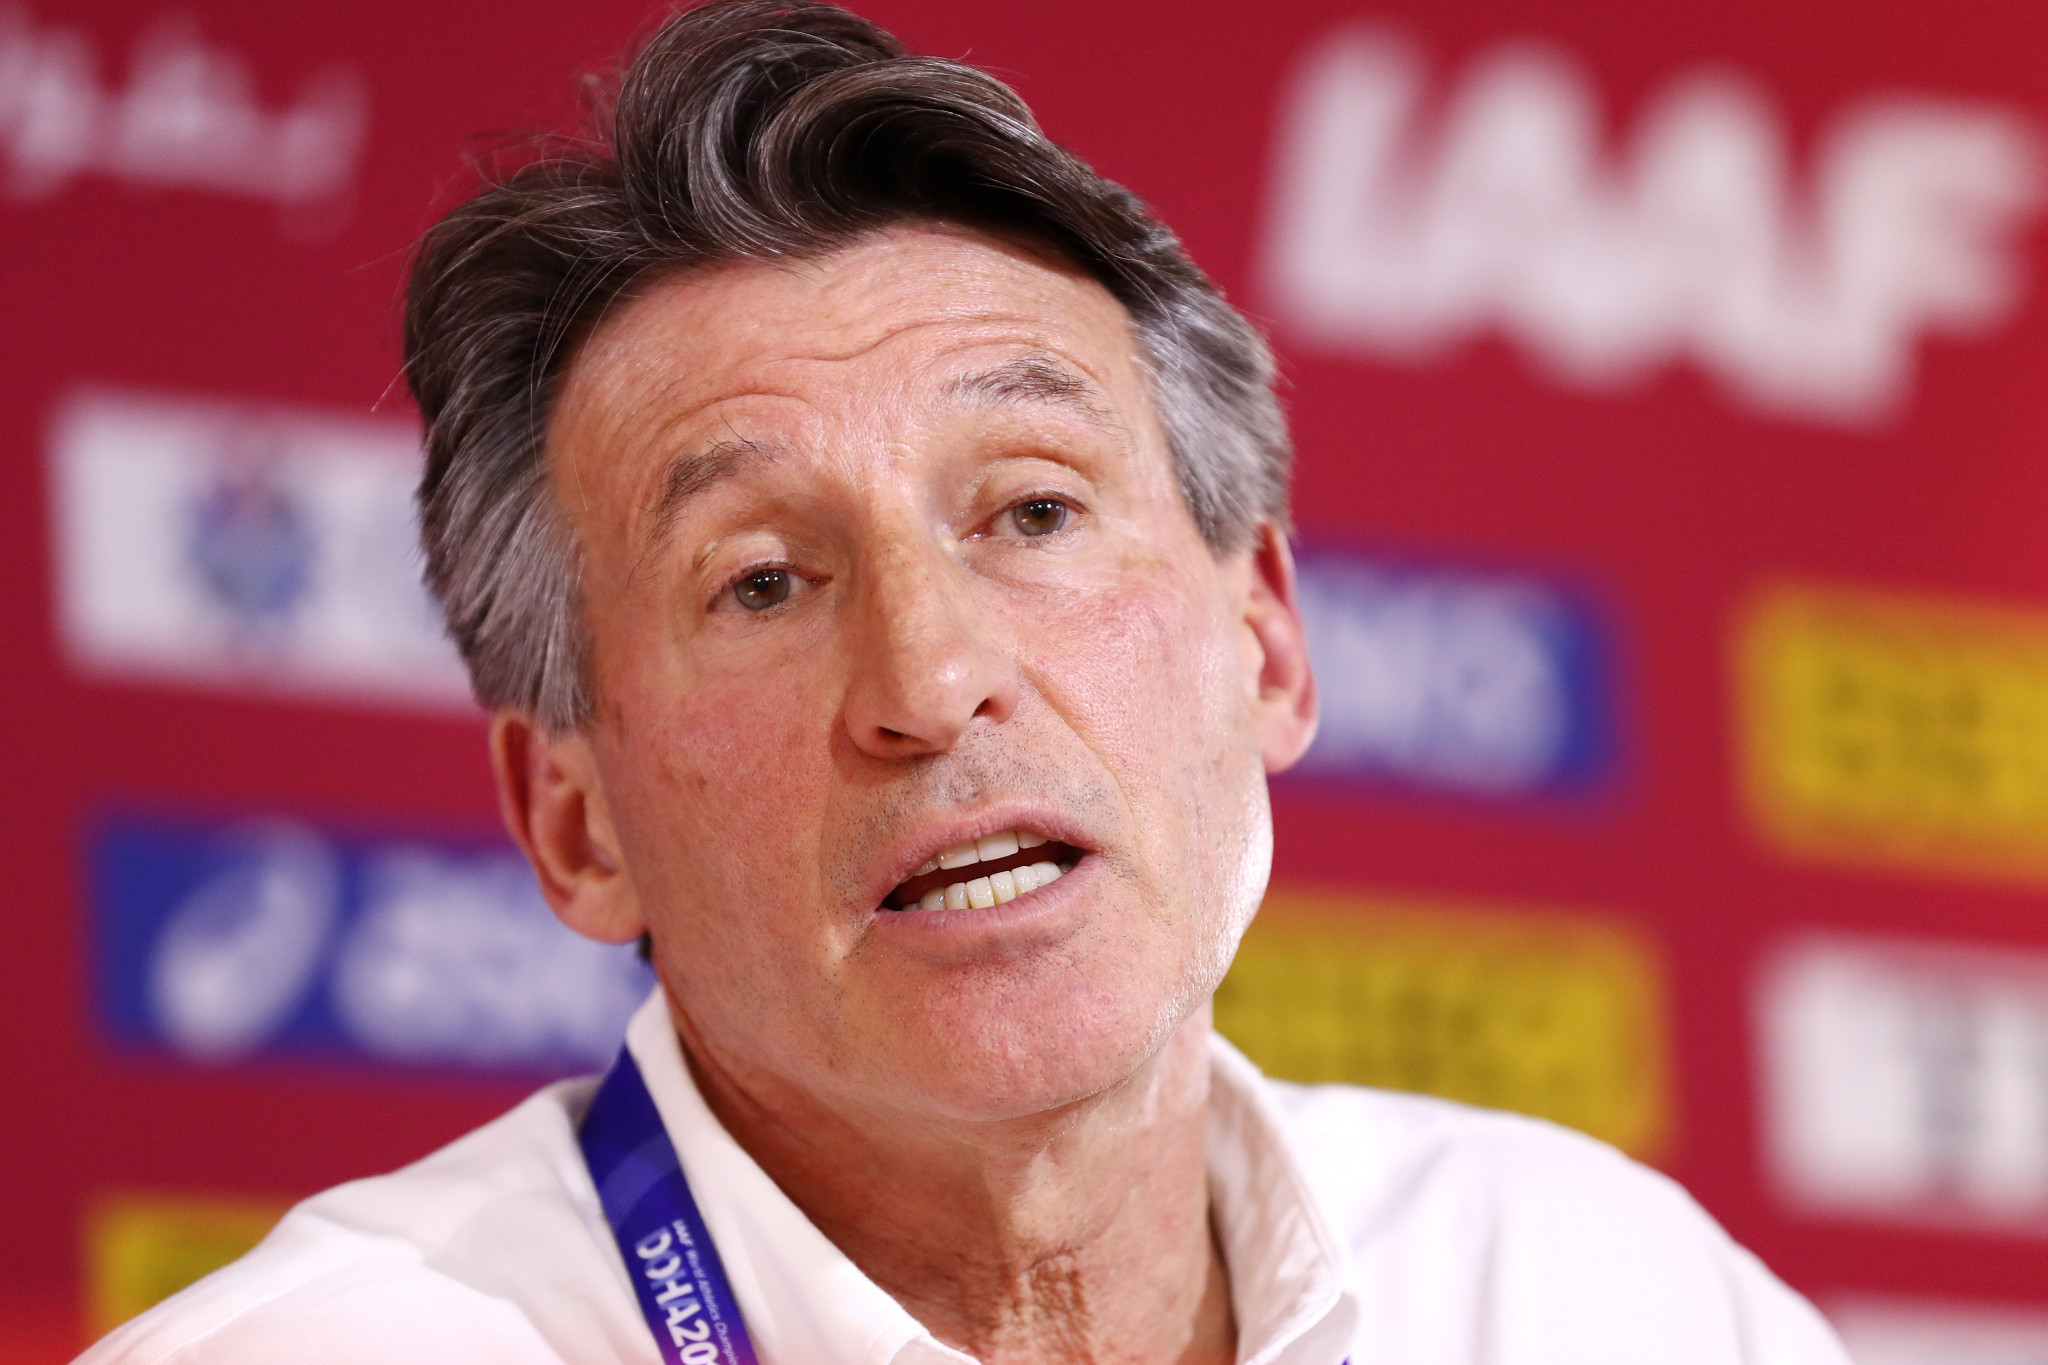 World Athletics, led by Seb Coe, is aiming to hold reserves of $25 million at all times from 2020 onwards ©Getty Images